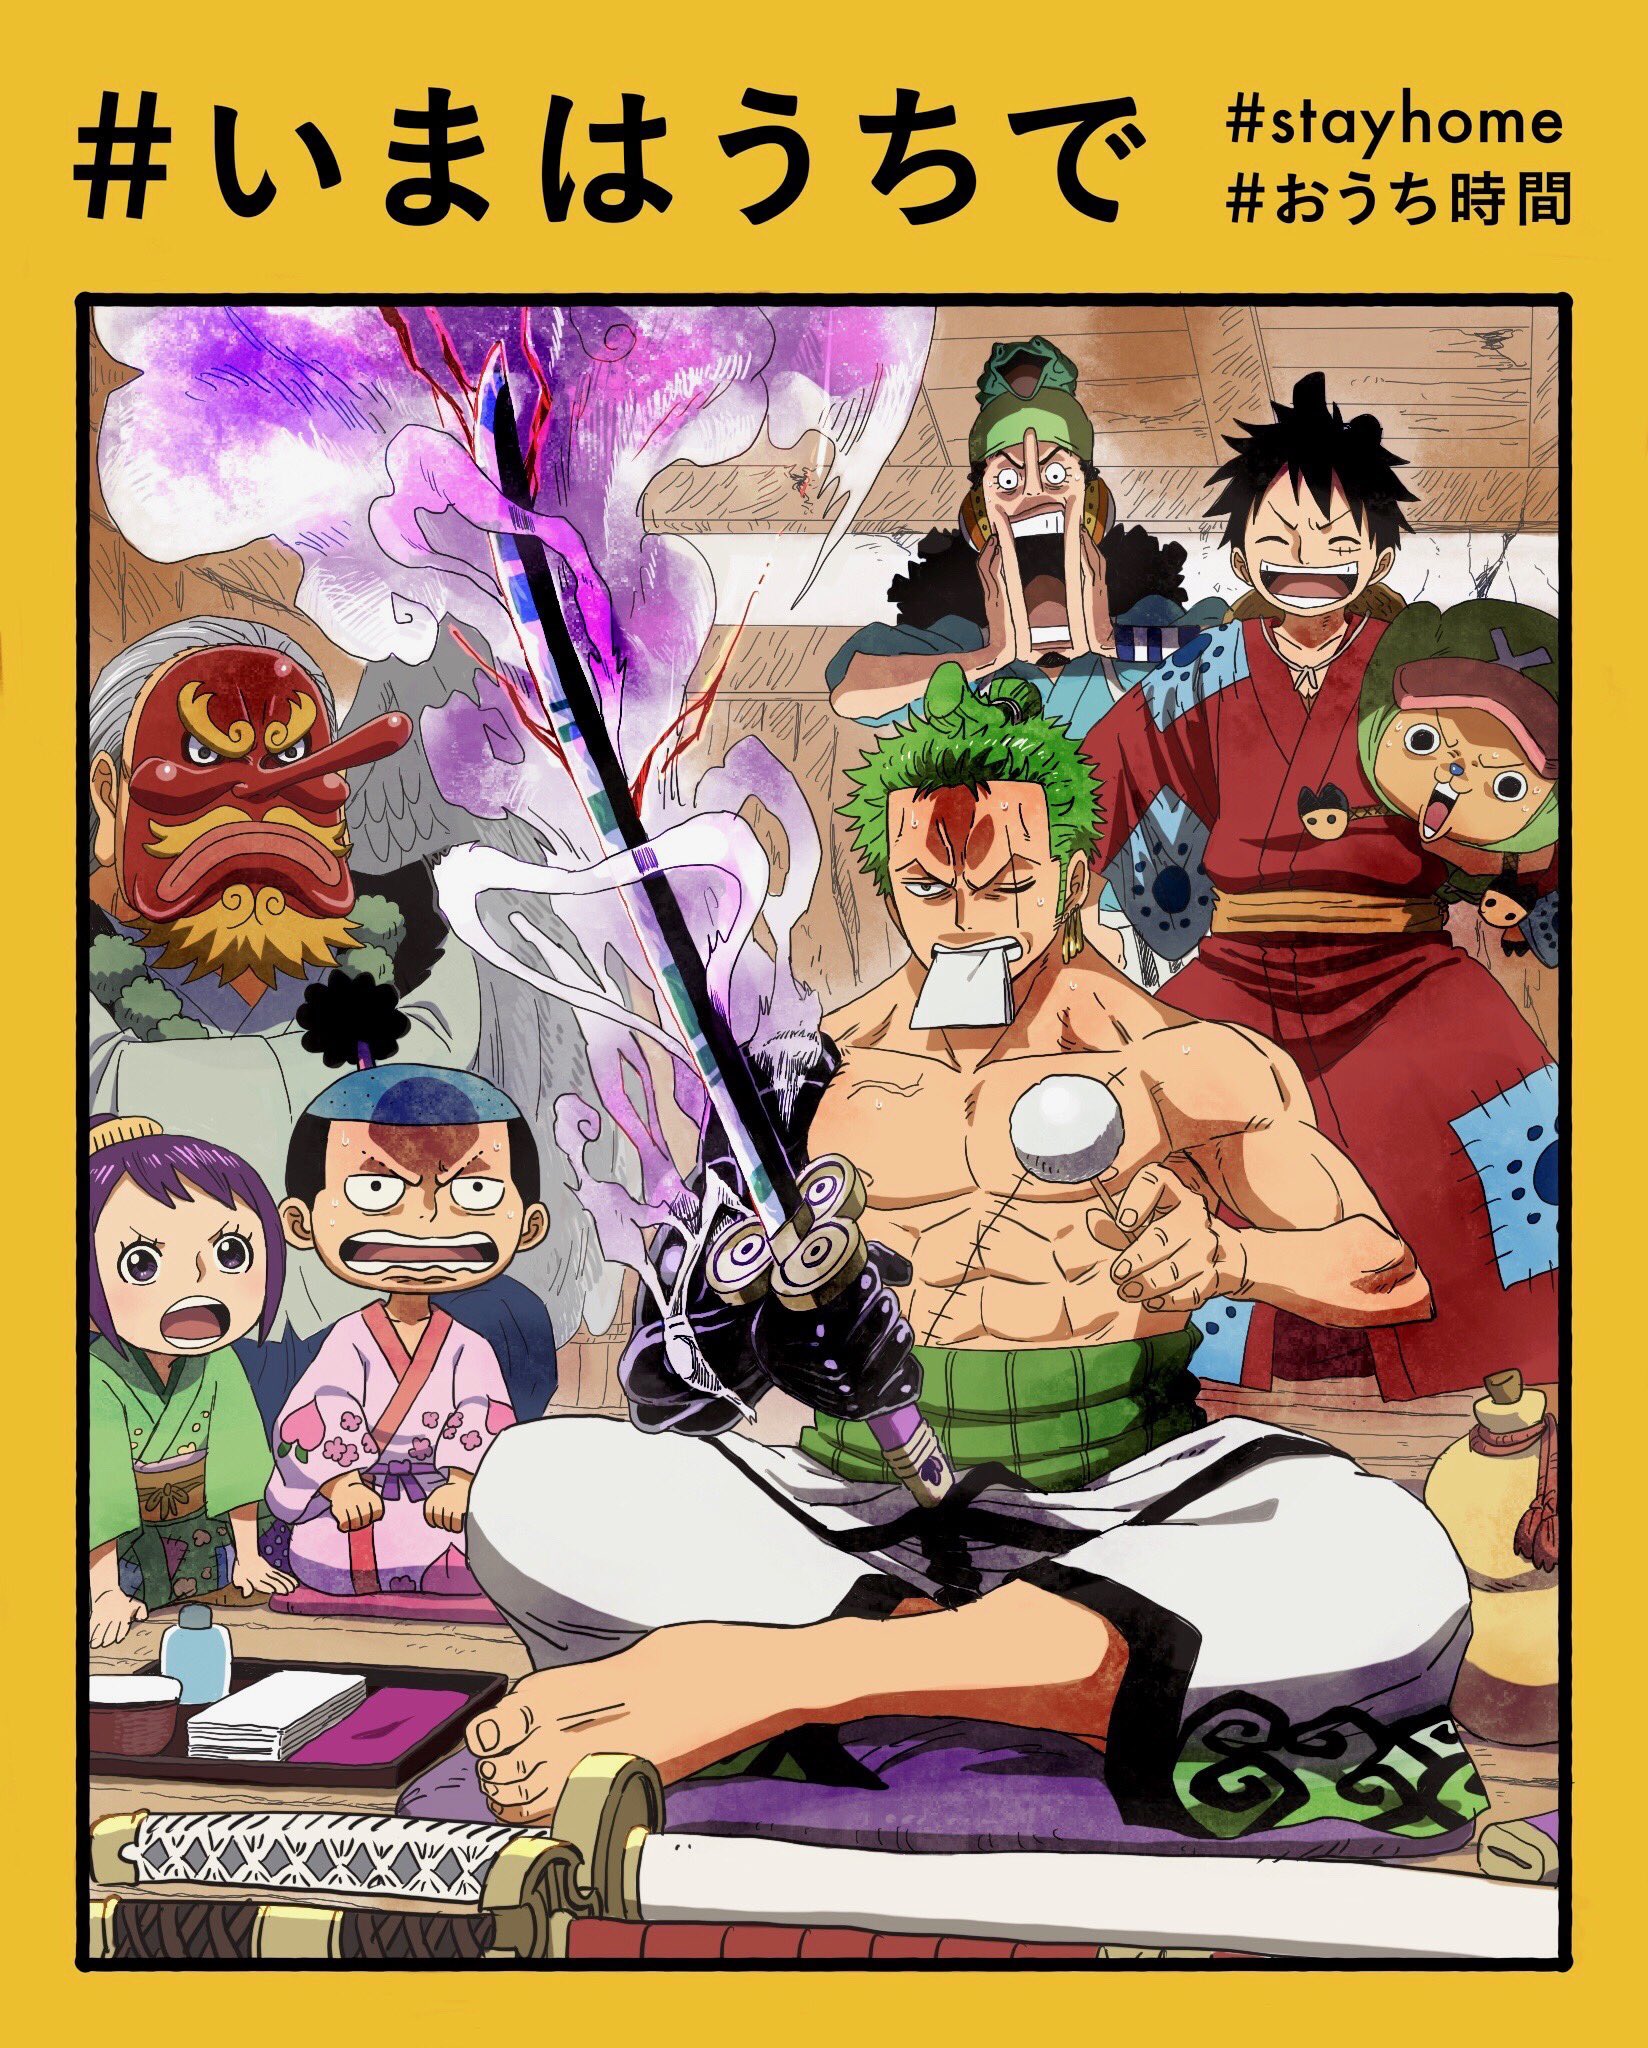 Prma A Portrait Of Zoro With Enma Which Was Designed By The Character Designer For The Wano Anime Arc Midori Matsuda Stayathome Onepiece T Co Pb4ndfsqks Twitter